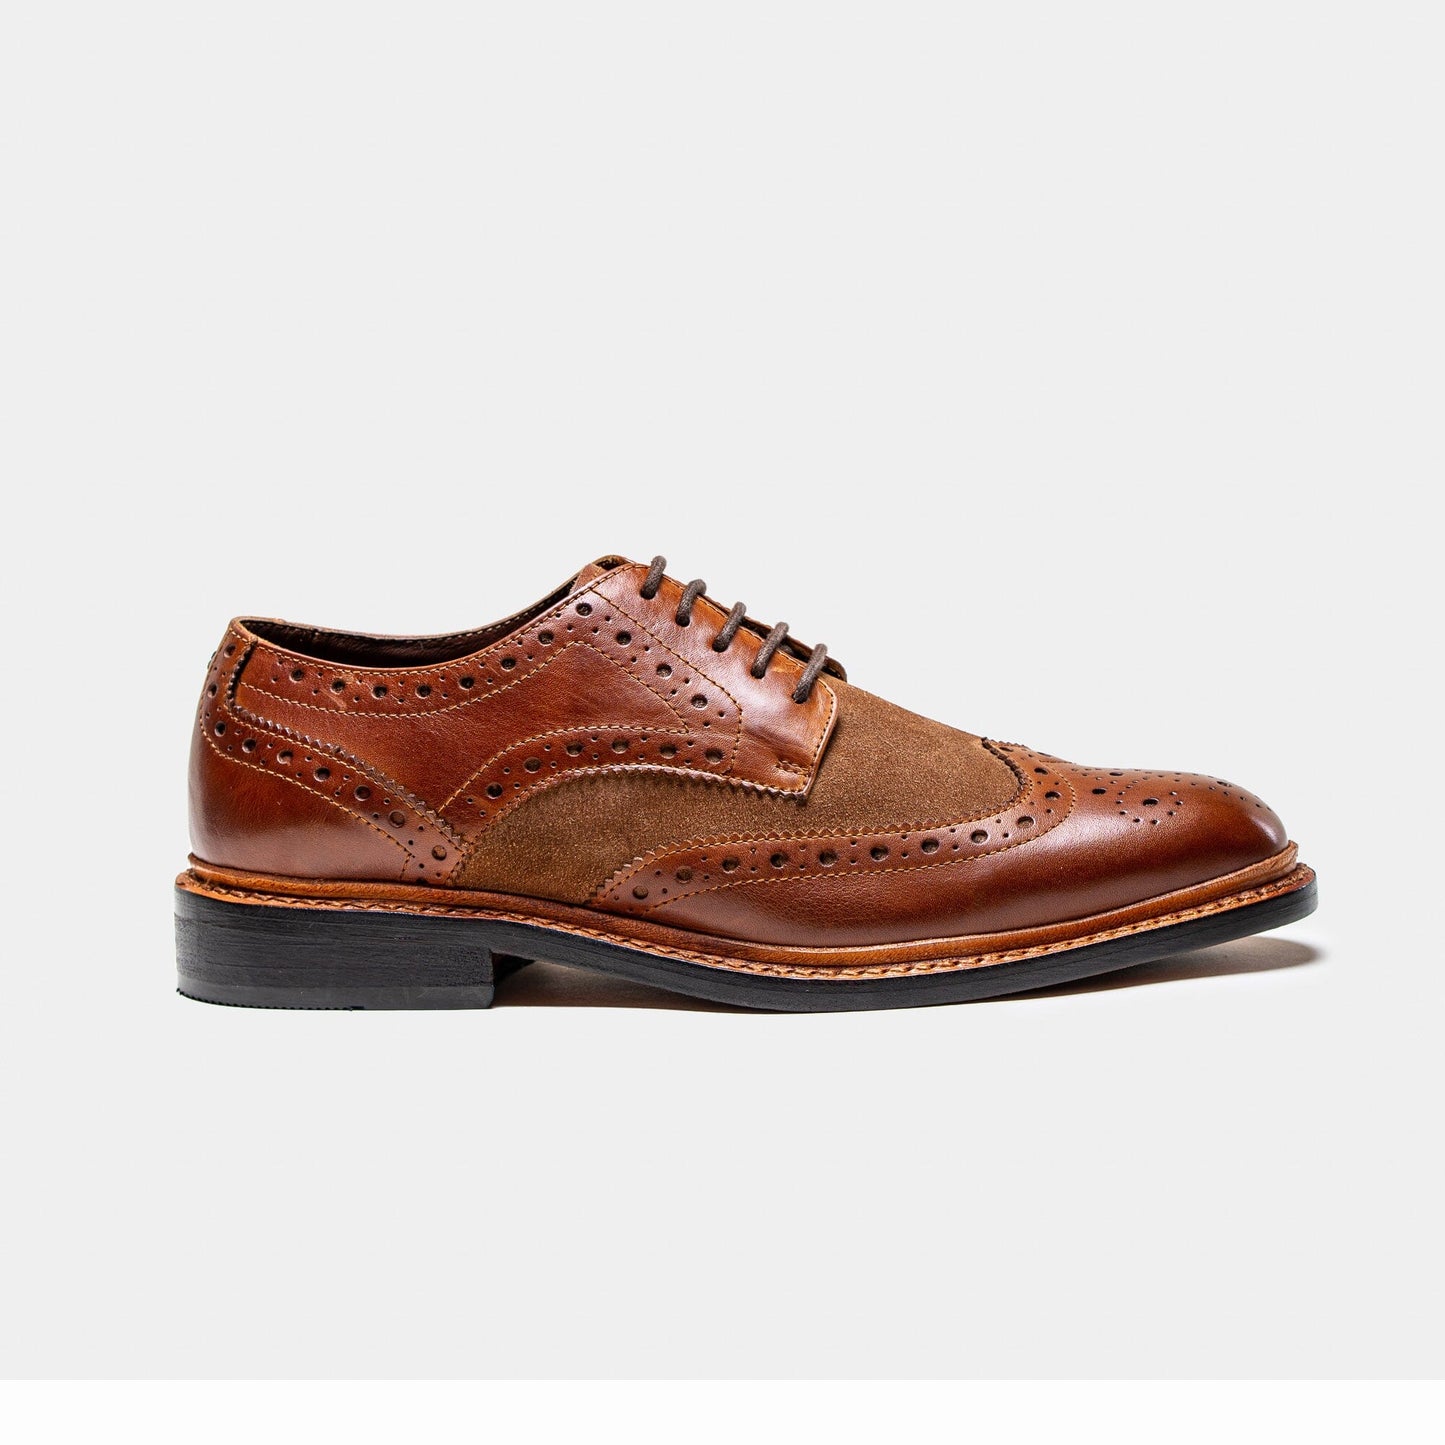 Merton Tan & Suede Shoes - Shoes - 7 - THREADPEPPER